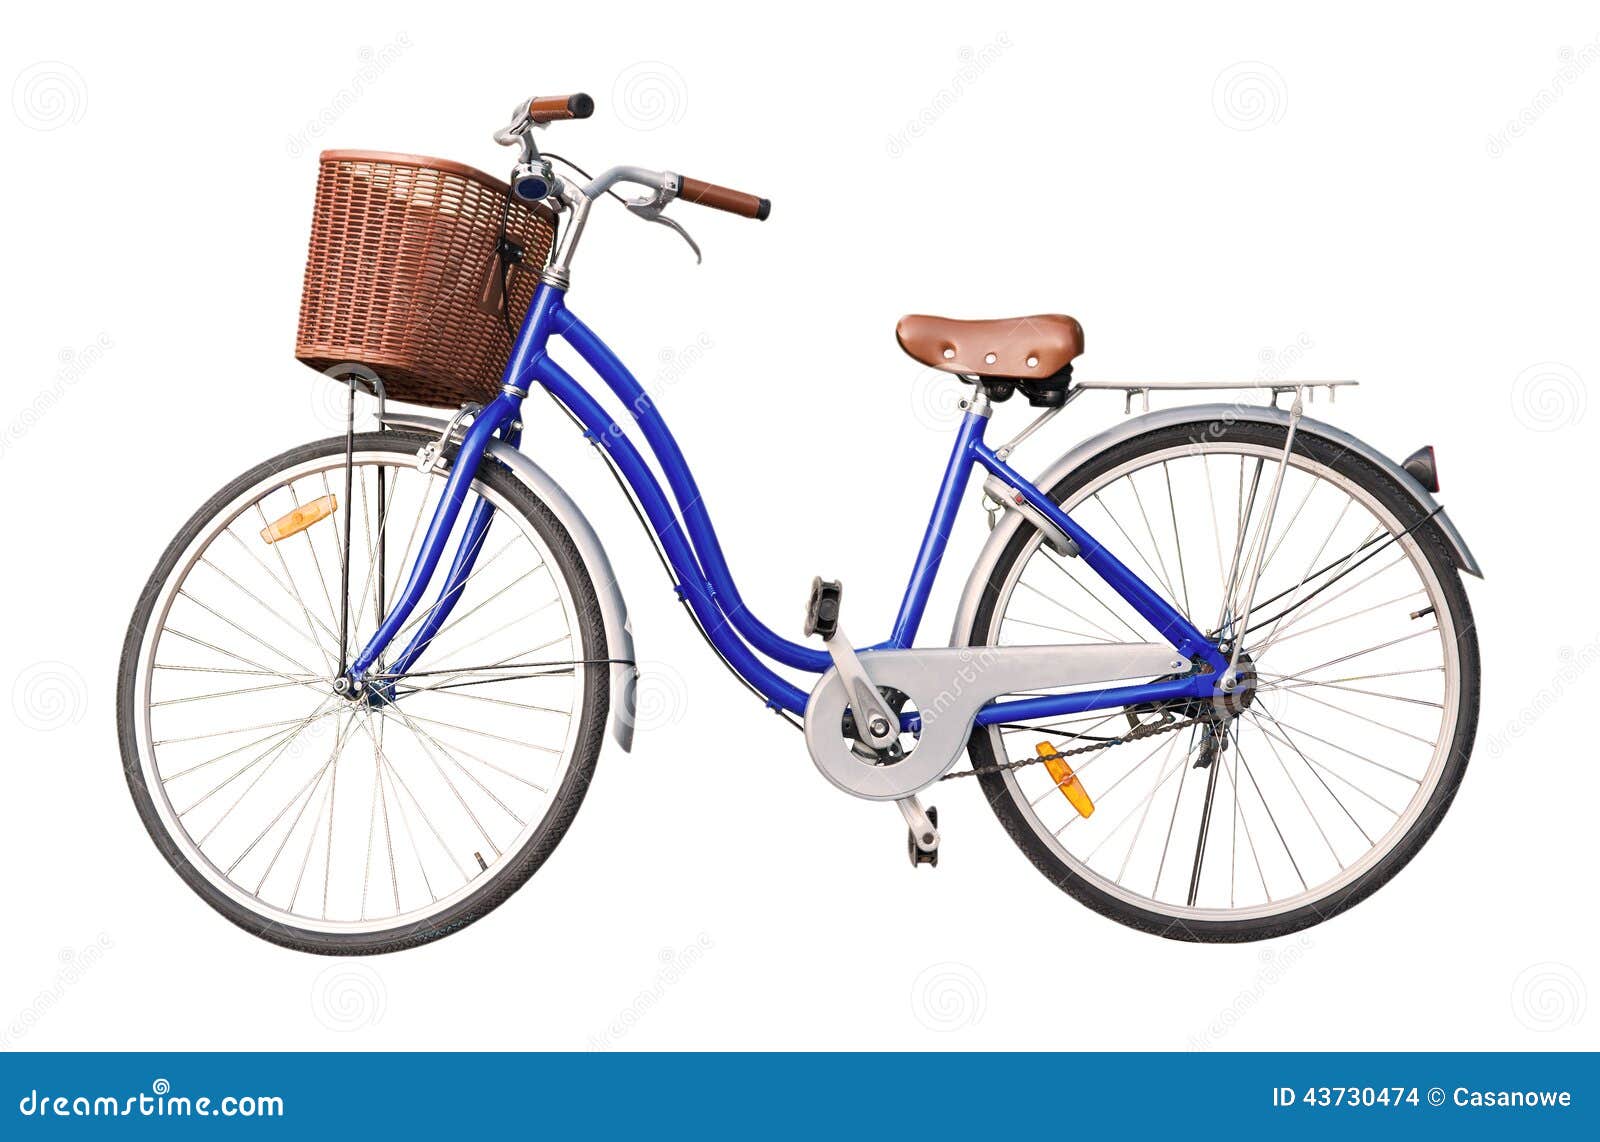 blue ladies bicycle isolate white background 43730474